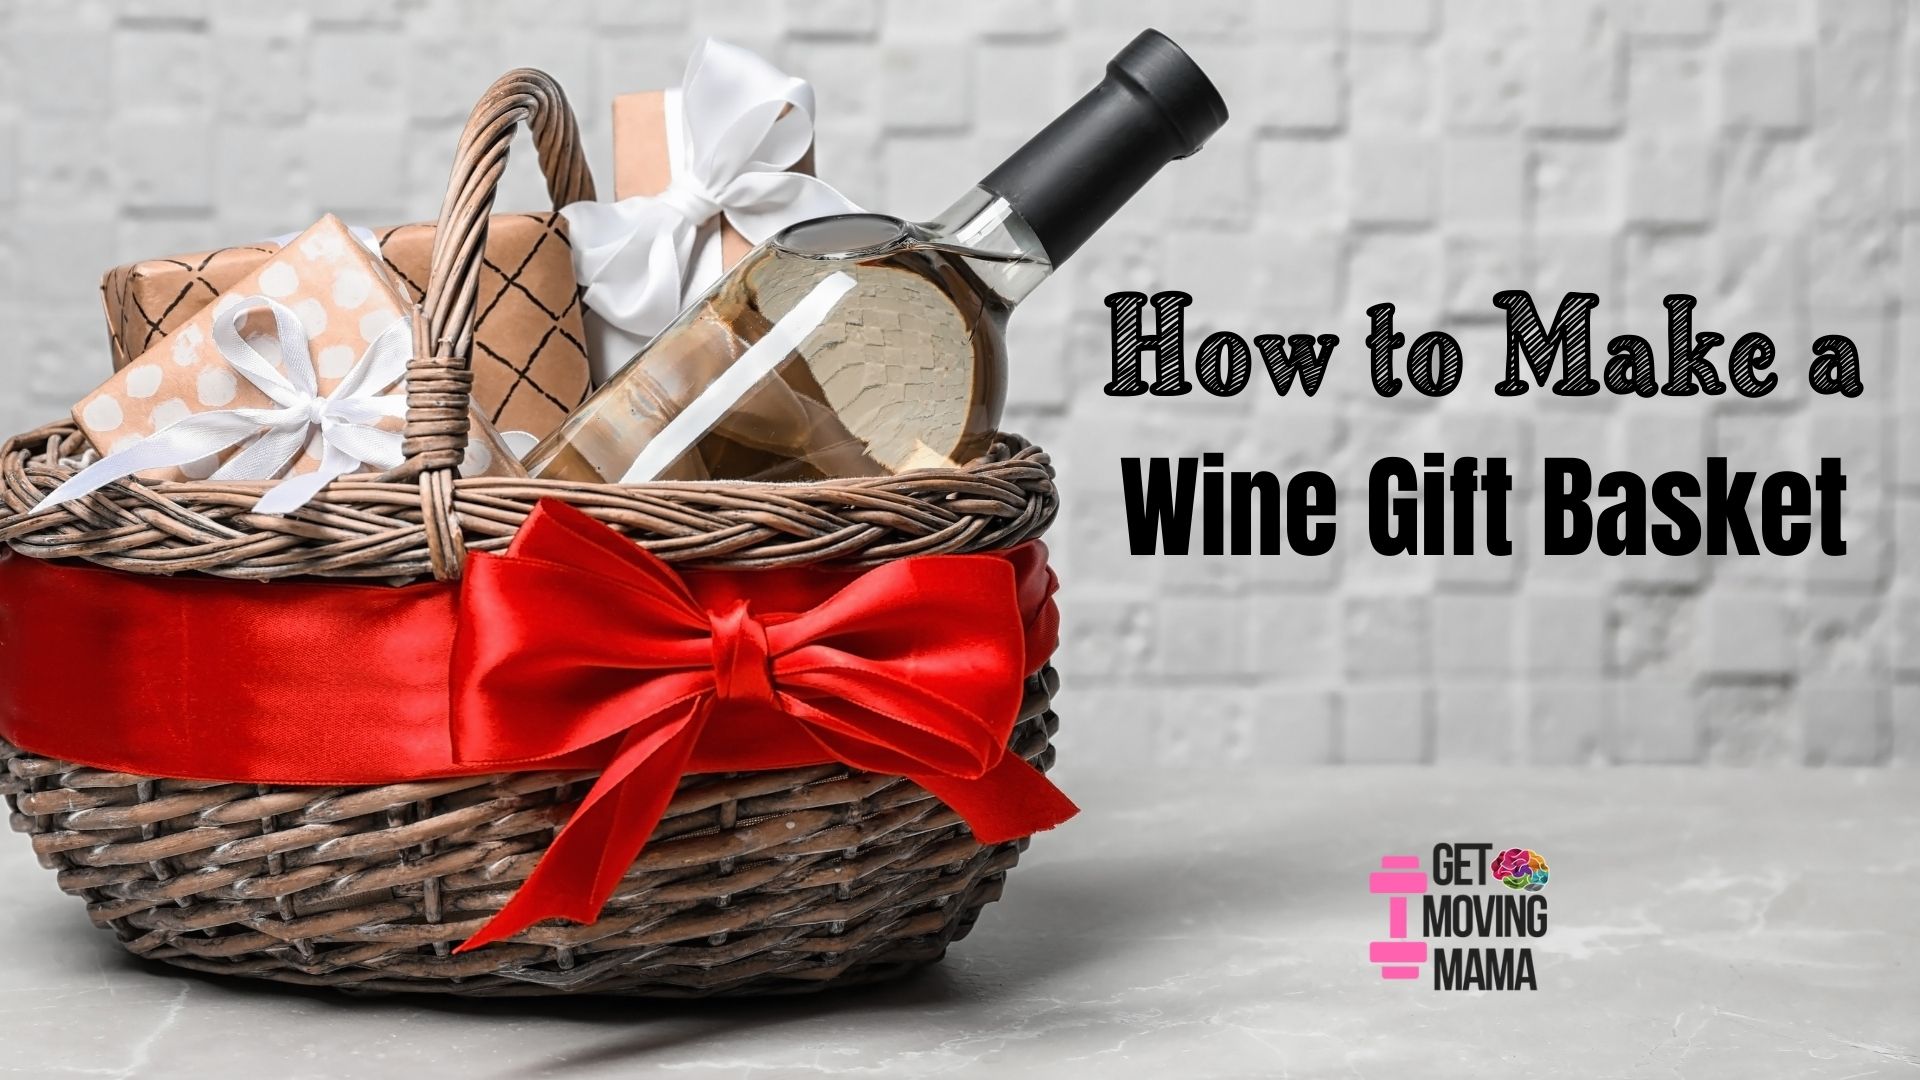 A picture of a wine gift basket with a red bow and wrapped gifts inside with white wine bottle.